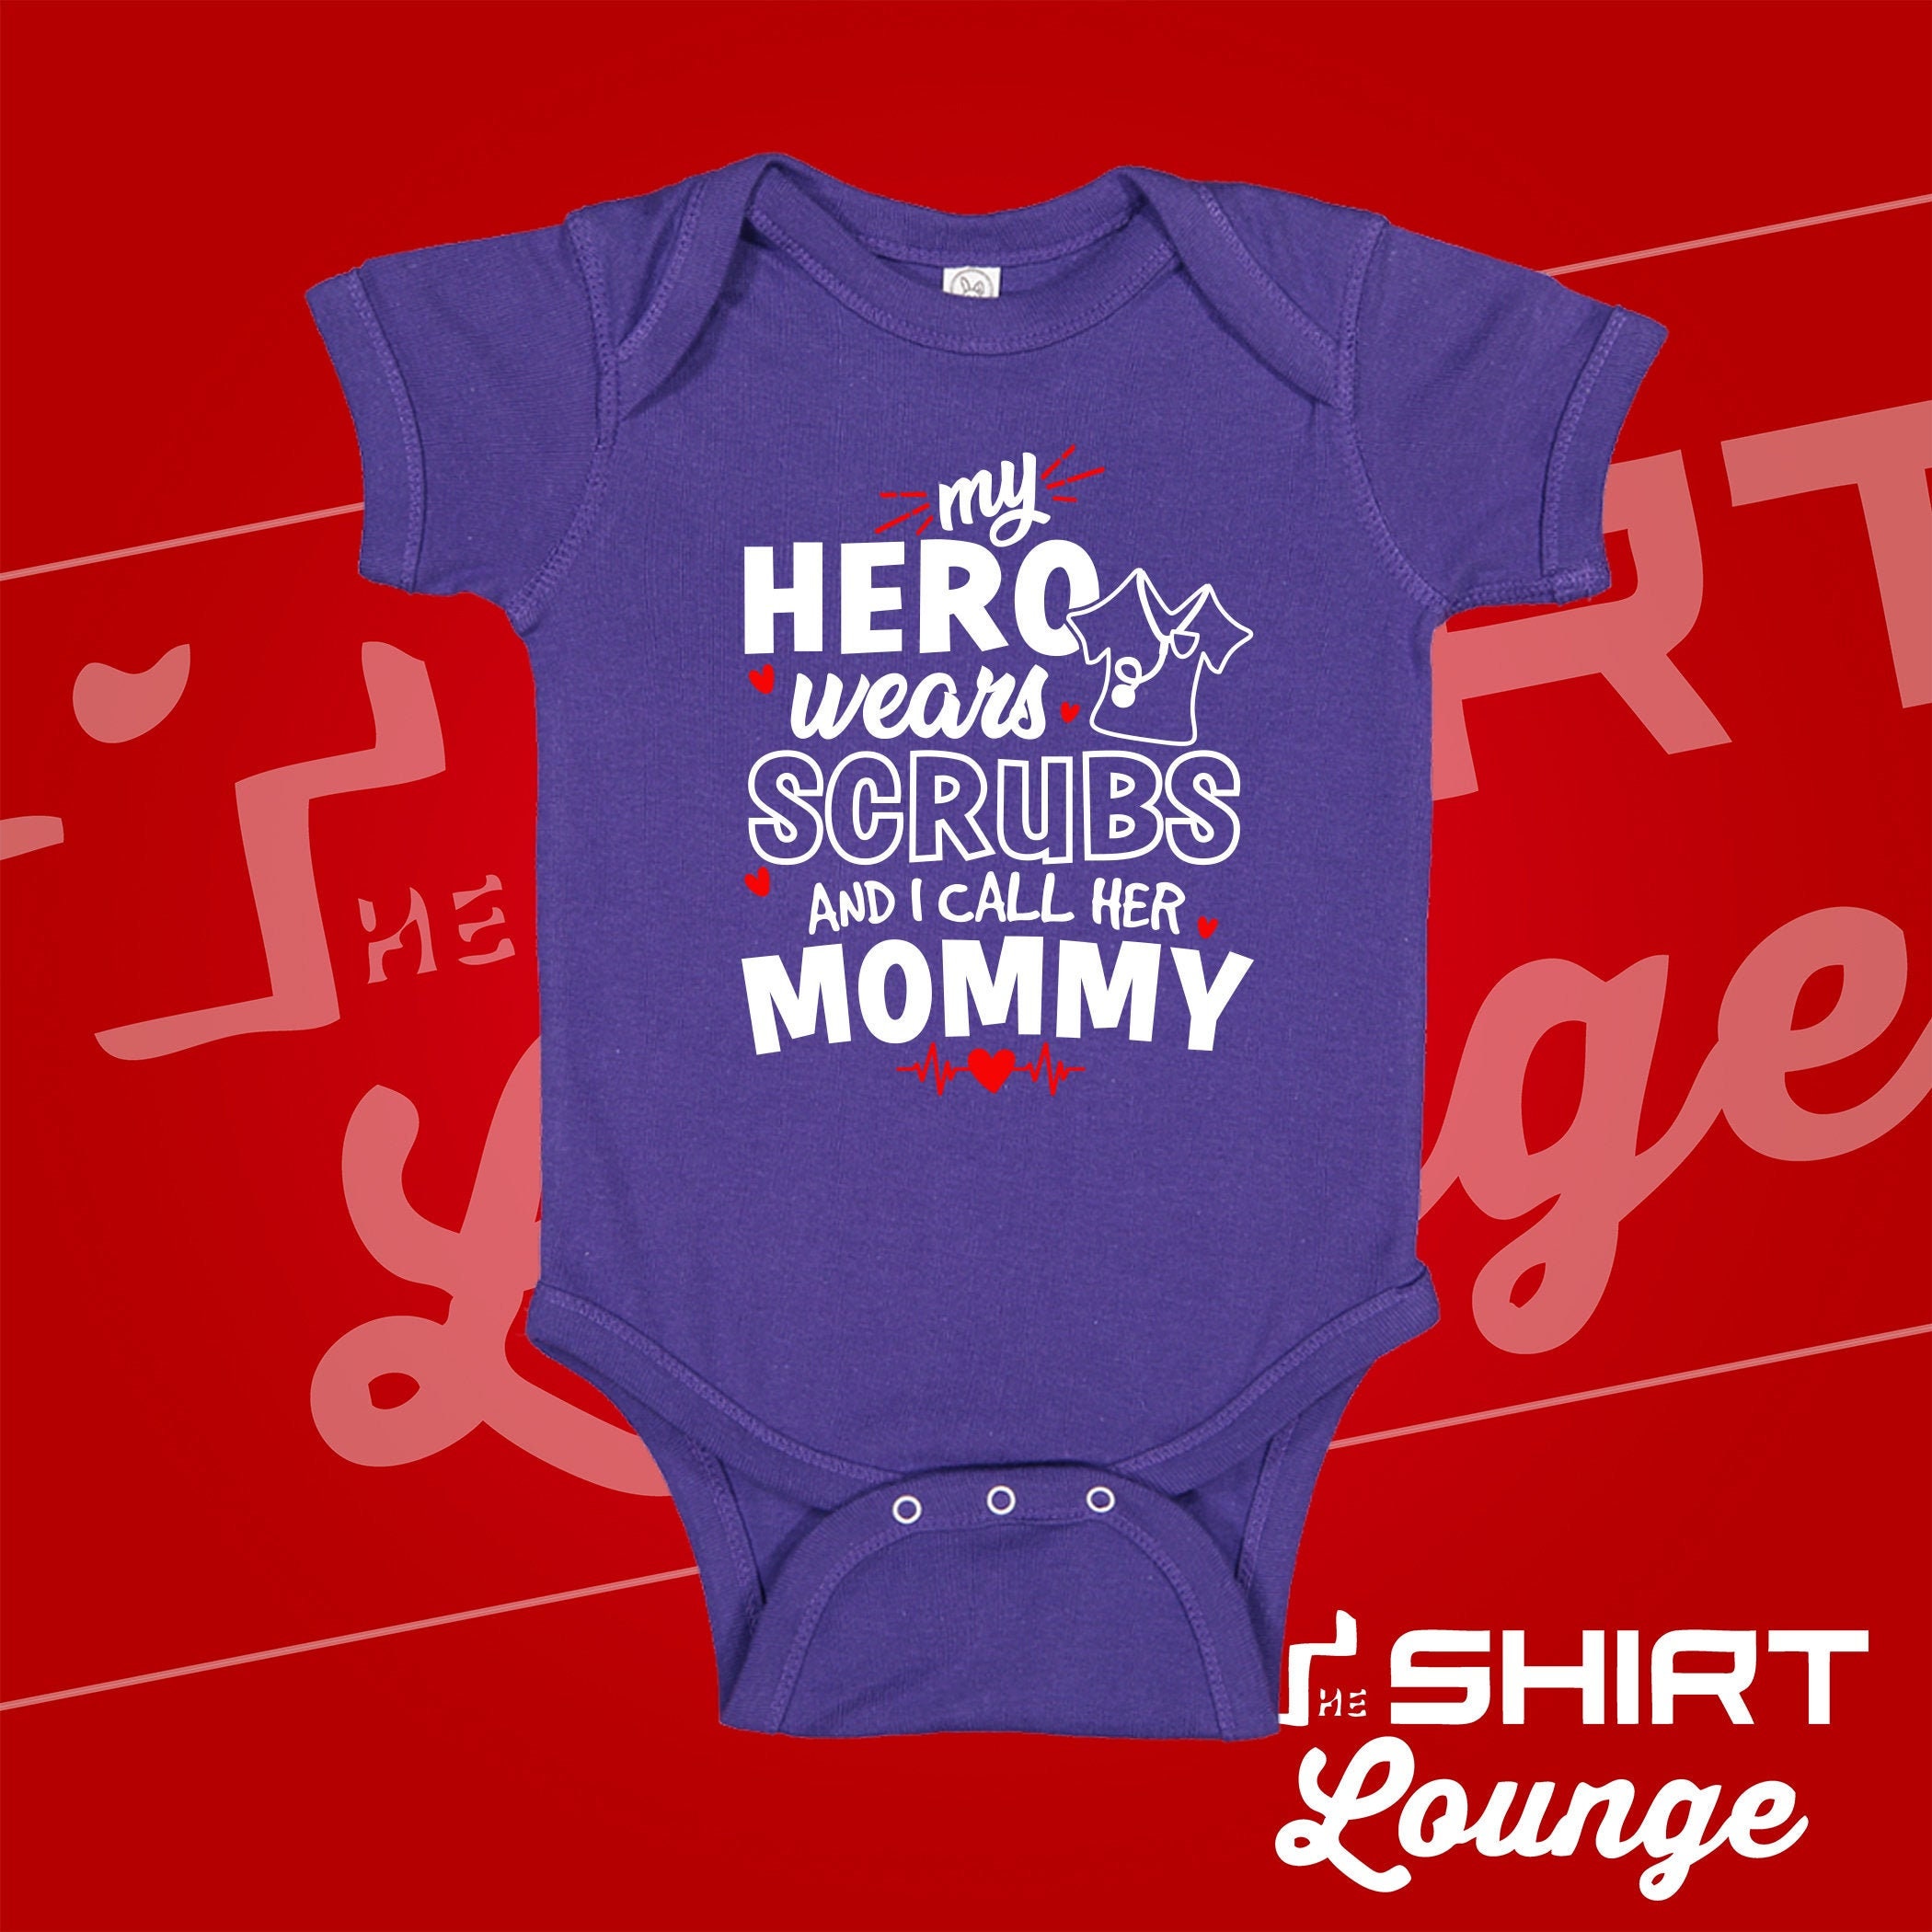 My Hero Wears Scrubs and I Call Her Mommy Cute Baby Bodysuit/toddler  T-shirt for Nurse Mom Baby Shower Gift Idea Clothing Clothes 